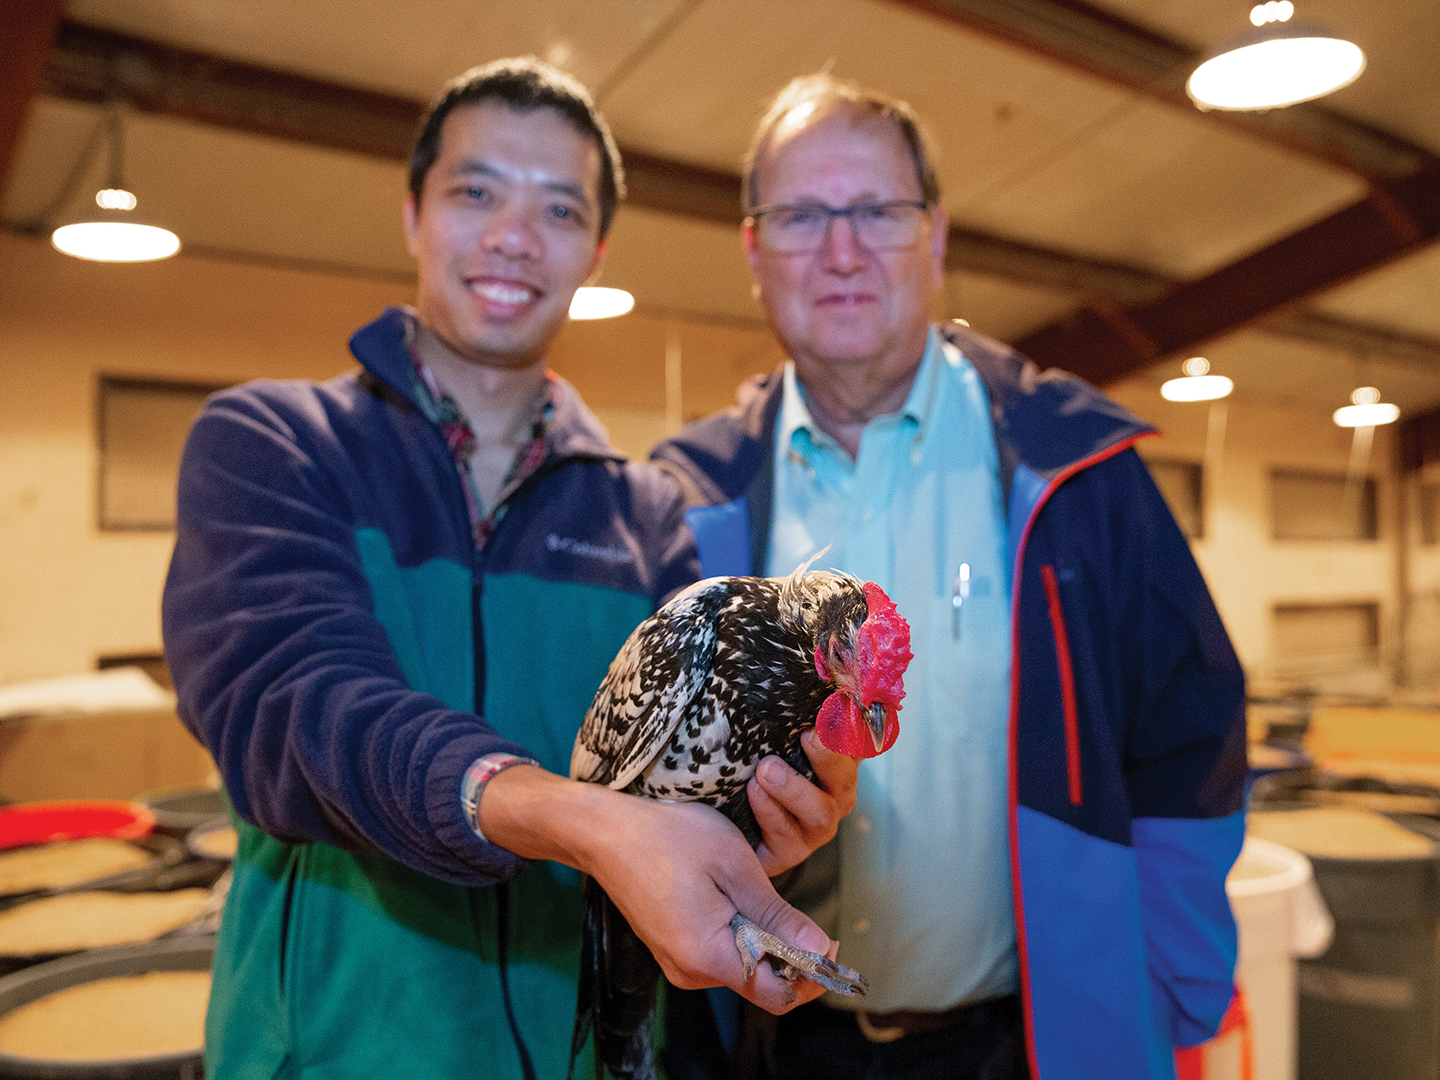 Dr. Jingyi Li holds a chicken out to the camera, standing next to Dr. Leif Andersson